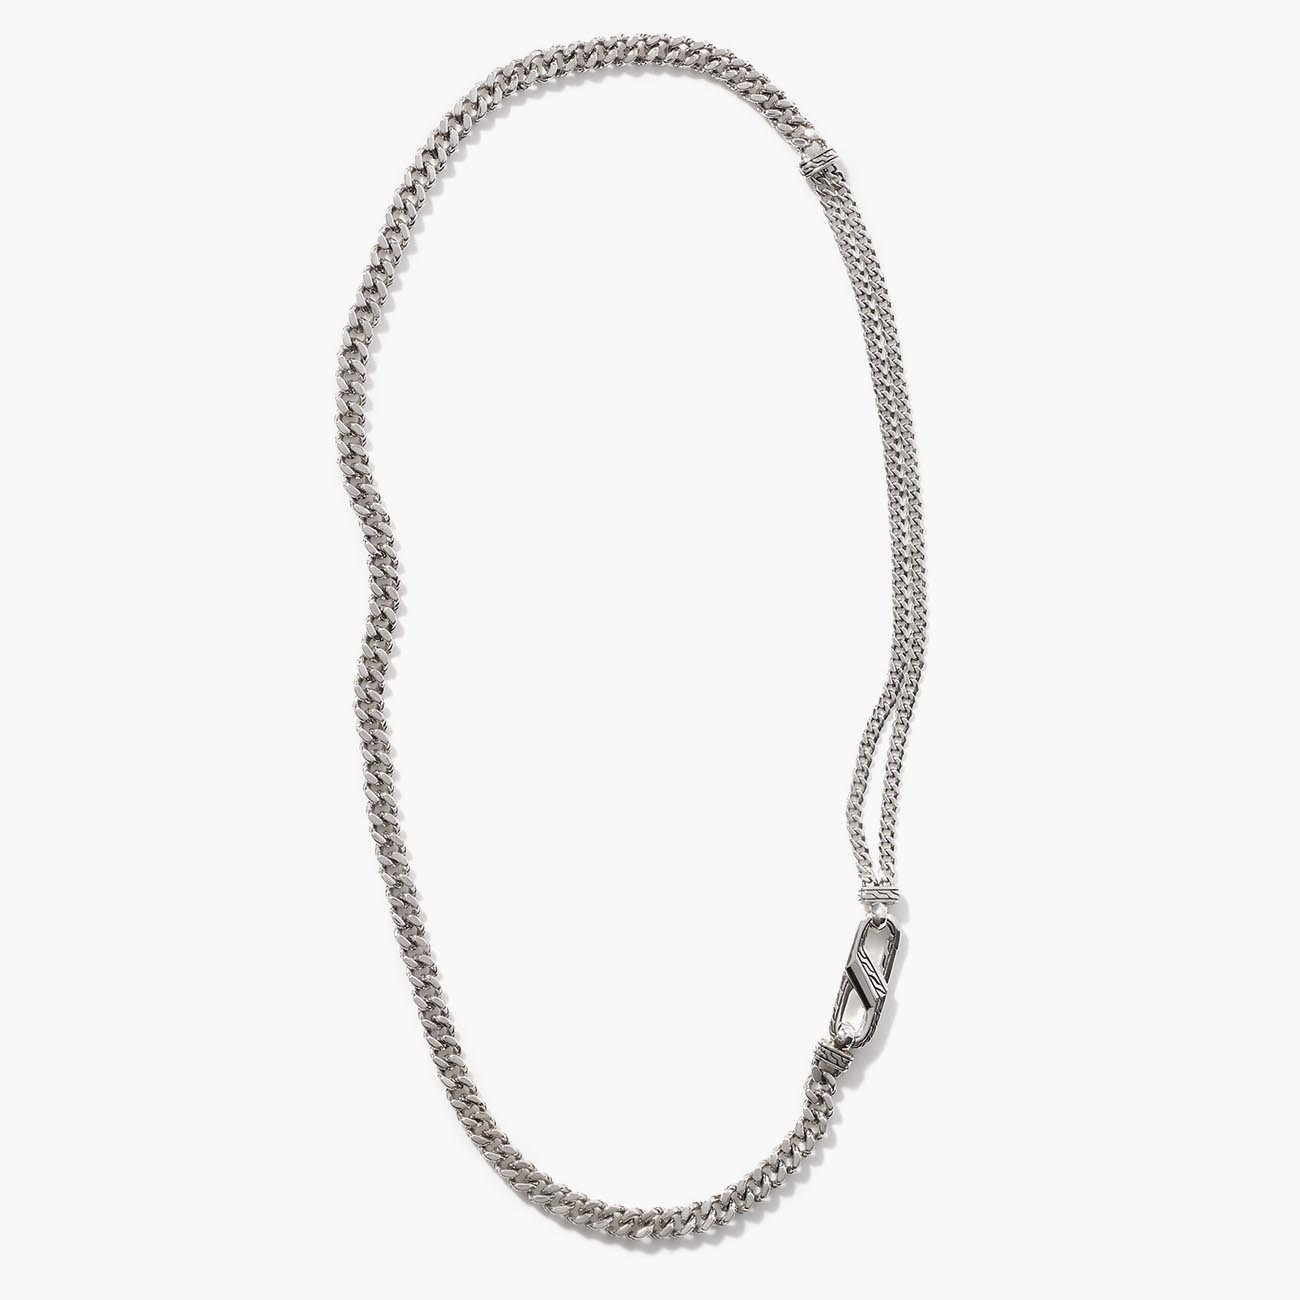 John Hardy Chain Remix 7mm Curb Link Necklace